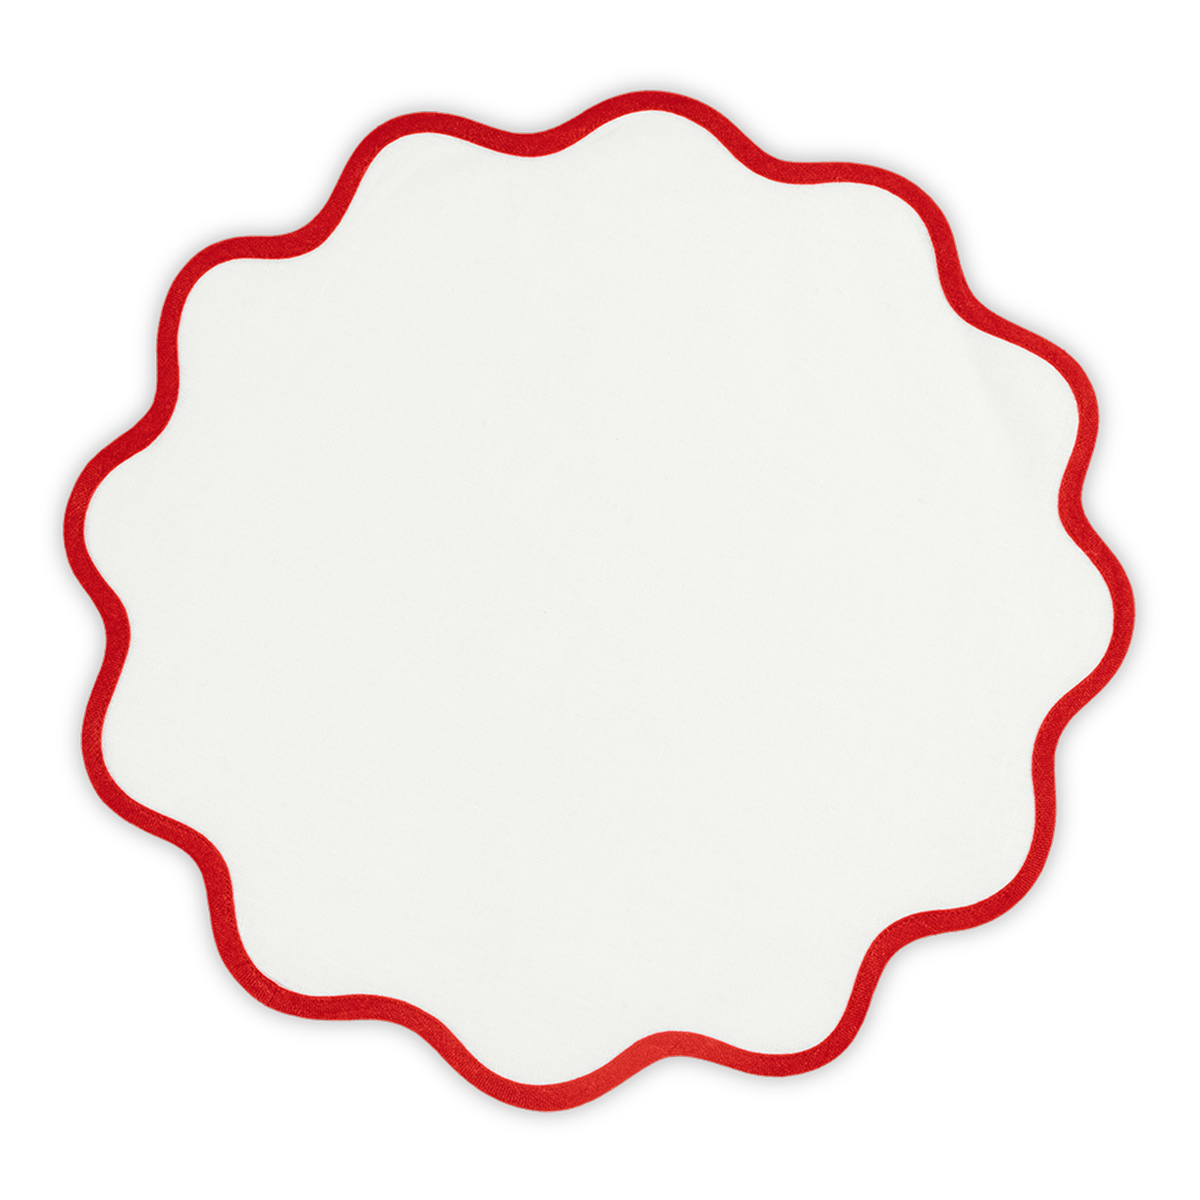 Silo Image of Matouk Scallop Edge Circle Placemat in Color Scarlet